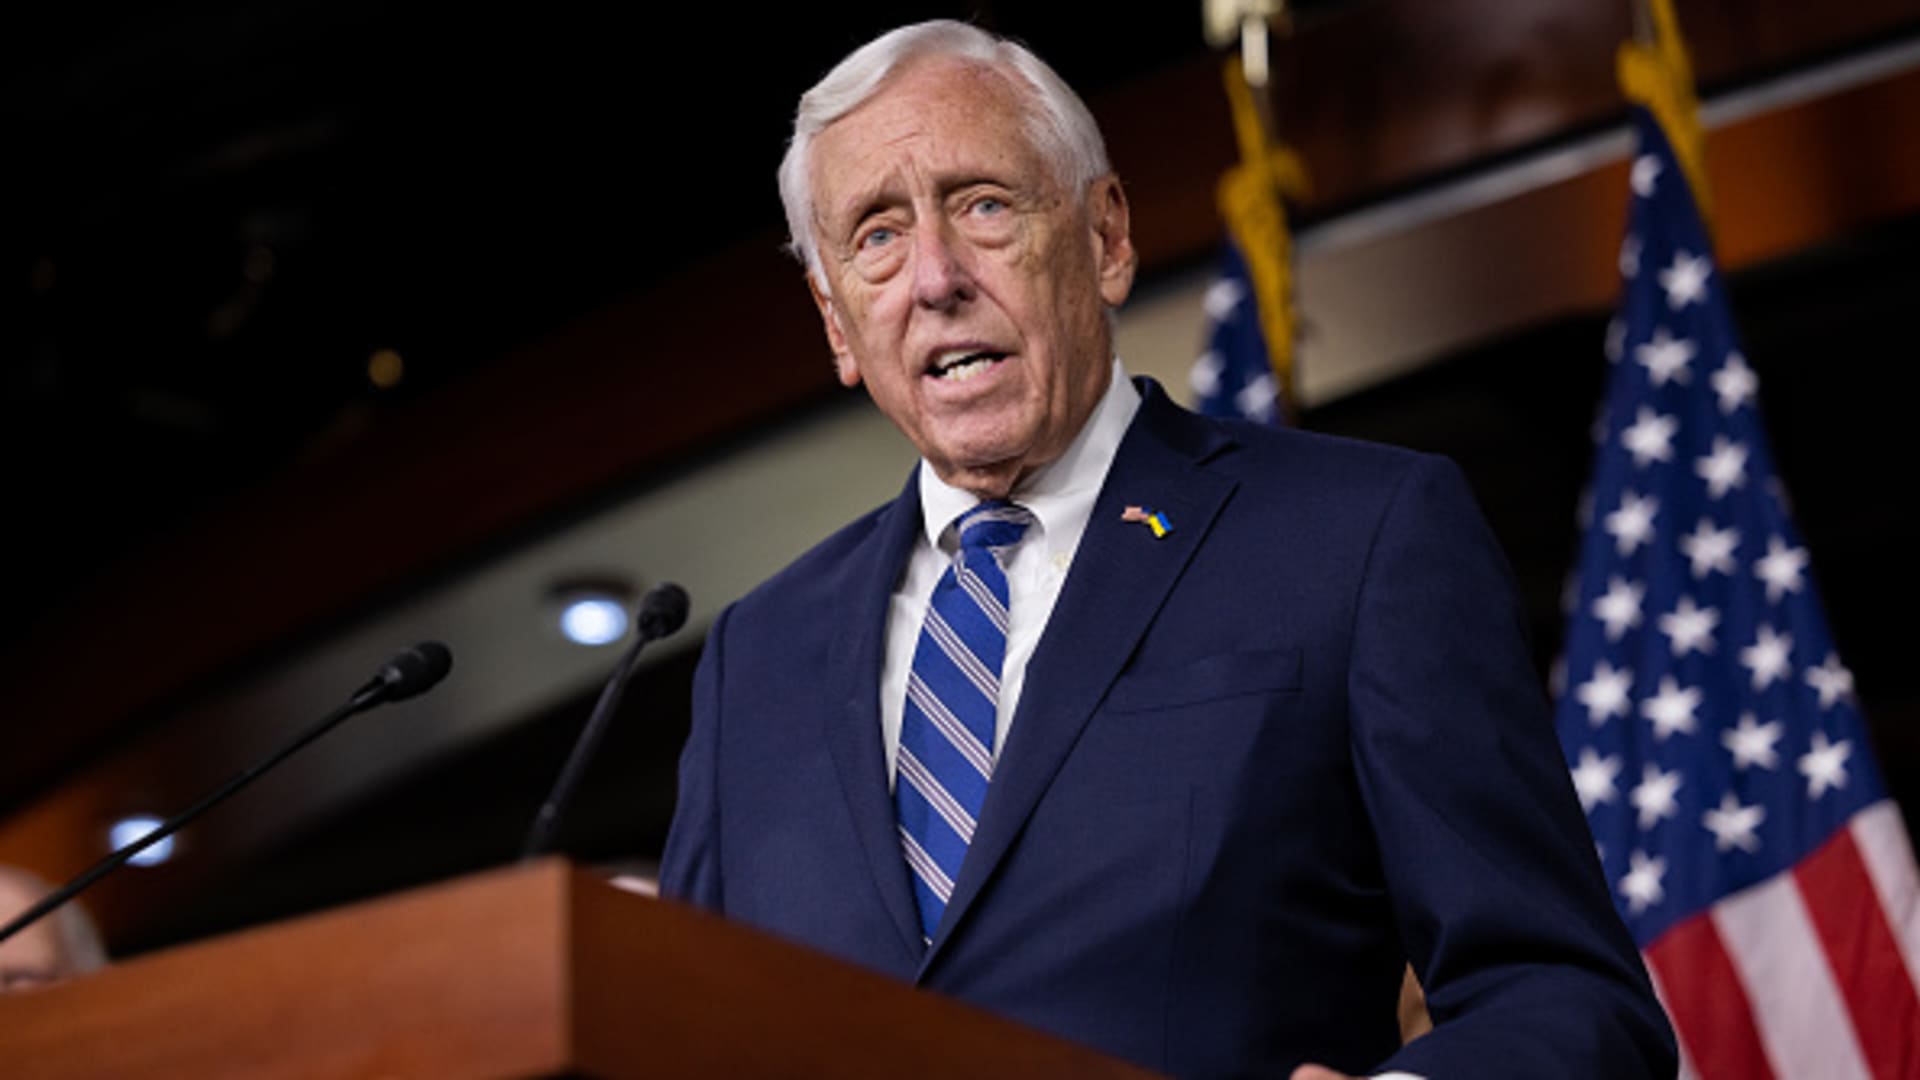 WASHINGTON, USA - JULY 28: House Majority Leader Steny Hoyer (D-MD) speaks during a news conference on the Wildfire Response and Drought Resiliency Act inside the U.S. Capitol in Washington, United States on July 28, 2022